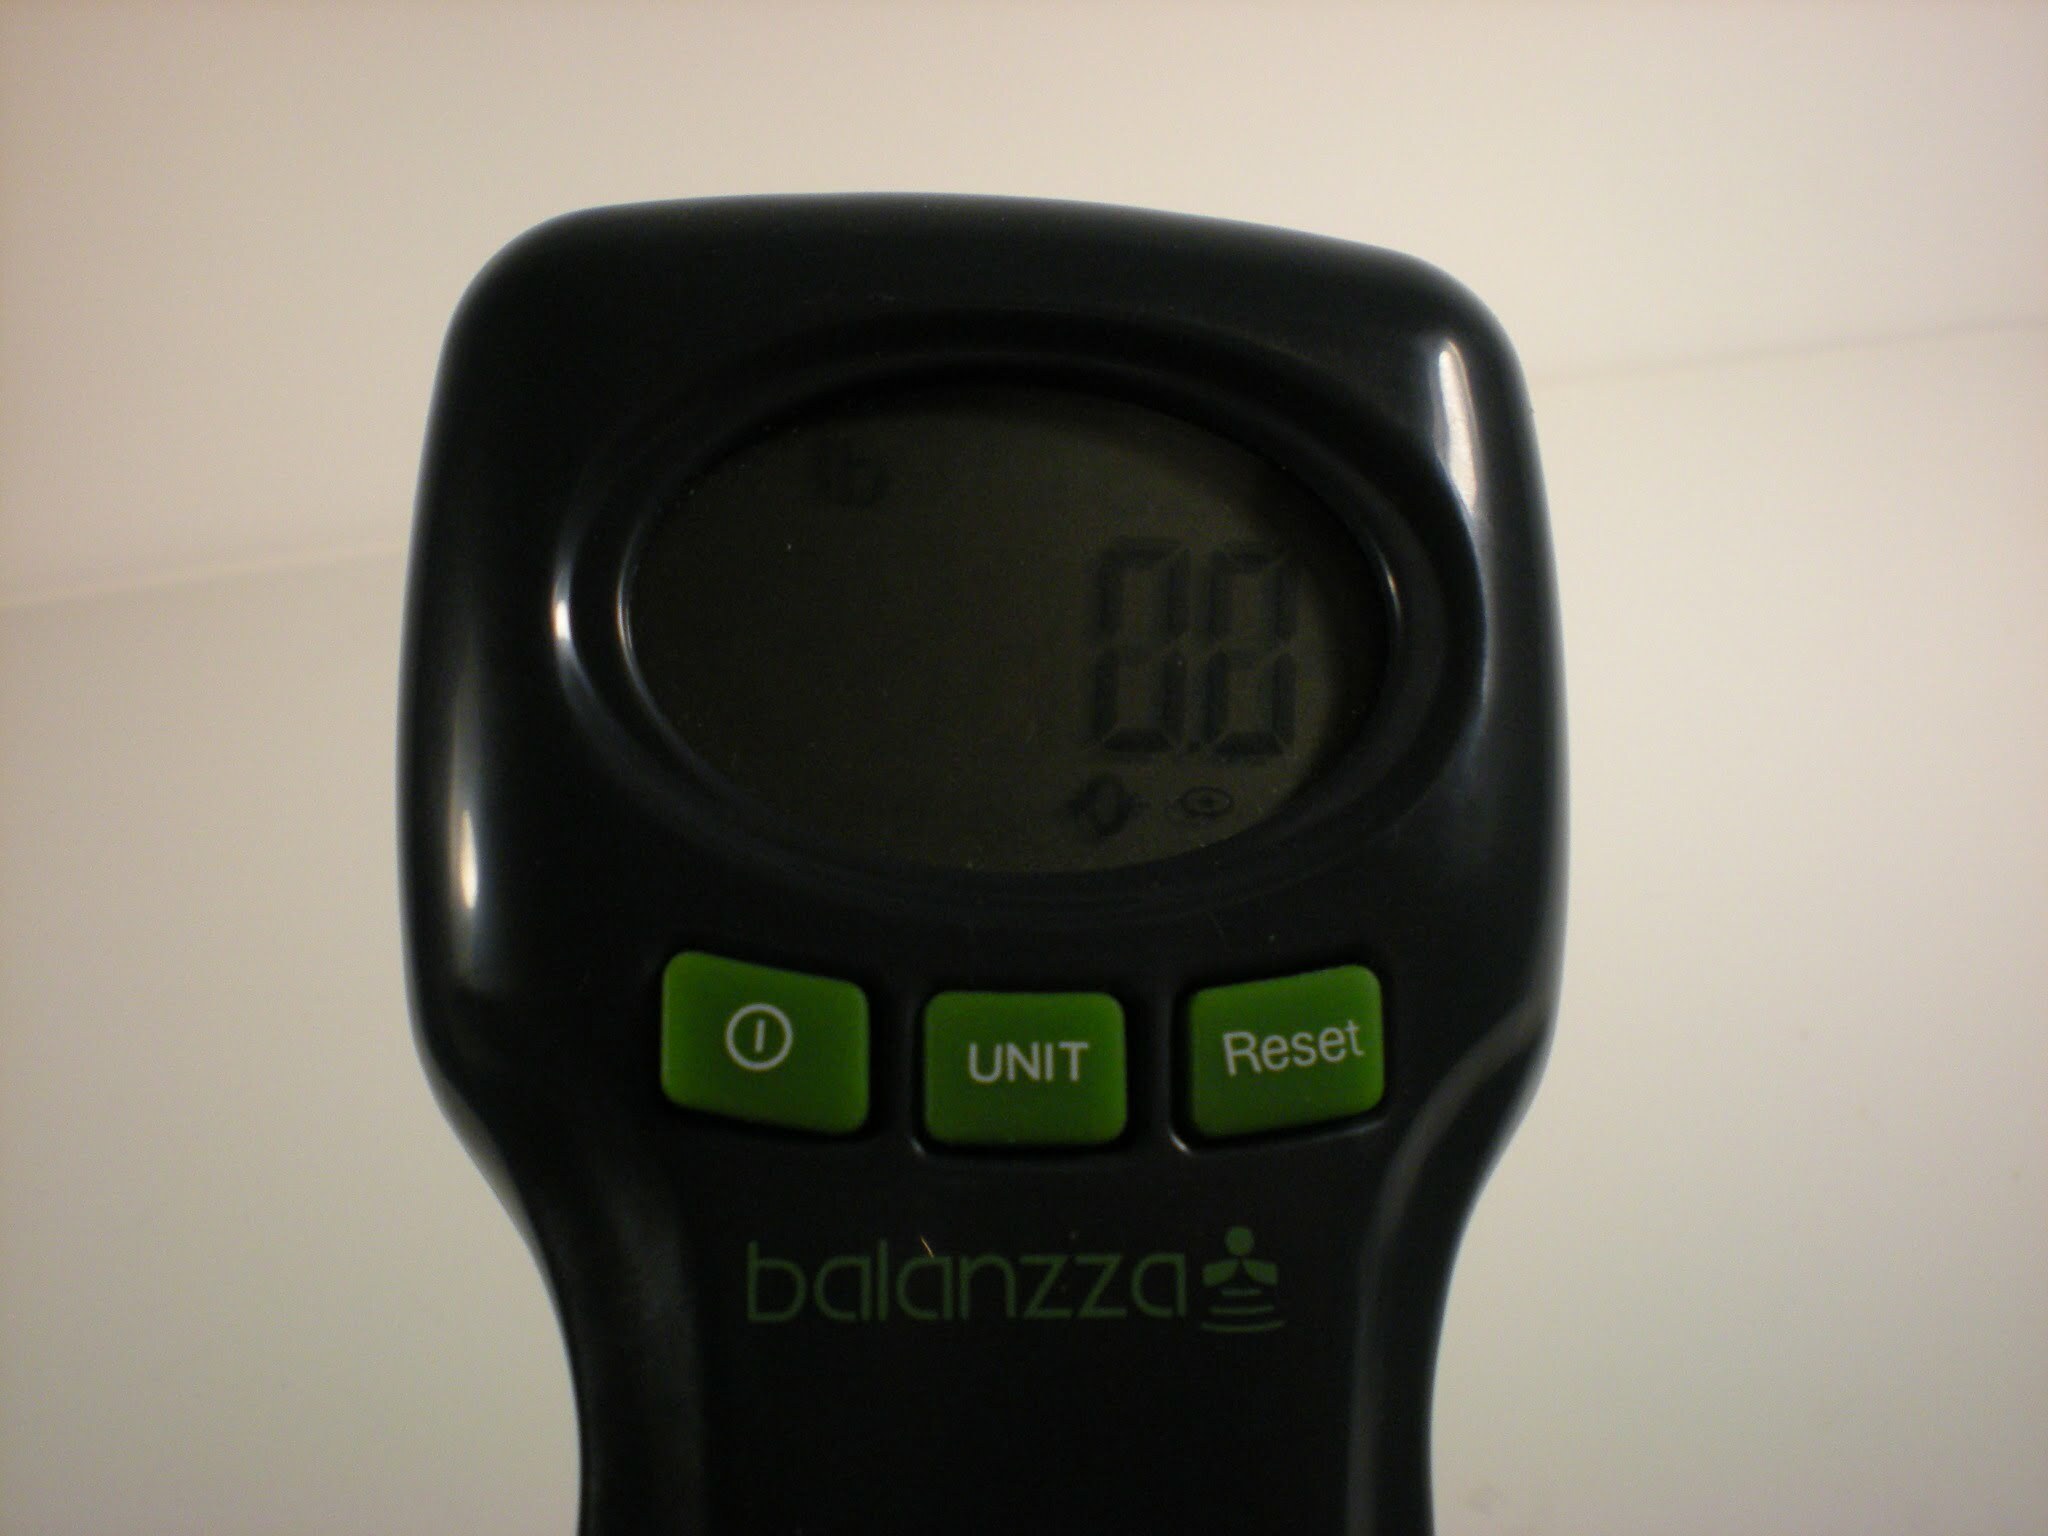 Balanzza Digital Luggage Scale Review